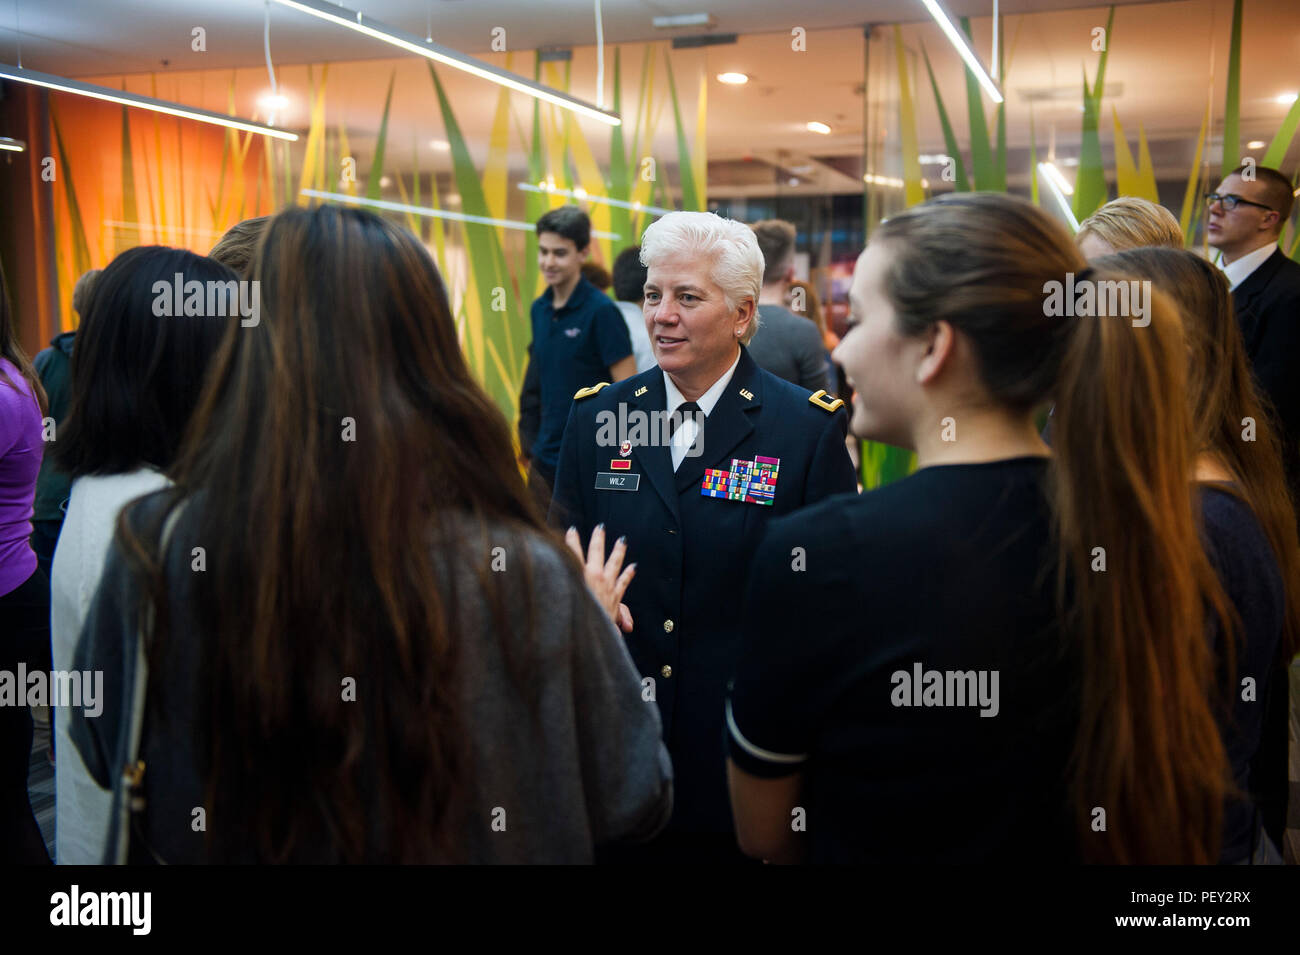 U.S. Army Brig. Gen. Giselle Wilz, NATO Headquarters Sarajevo commander, speaks with students from THINK Global School after a lecture in Sarajevo, Bosnia and Herzegovina, Feb. 16, 2016. Wilz spoke about NATO's mission in BiH and answered questions about NATO and current events. (U.S. Air Force photo by Staff Sgt. Clayton Lenhardt/Released) Stock Photo